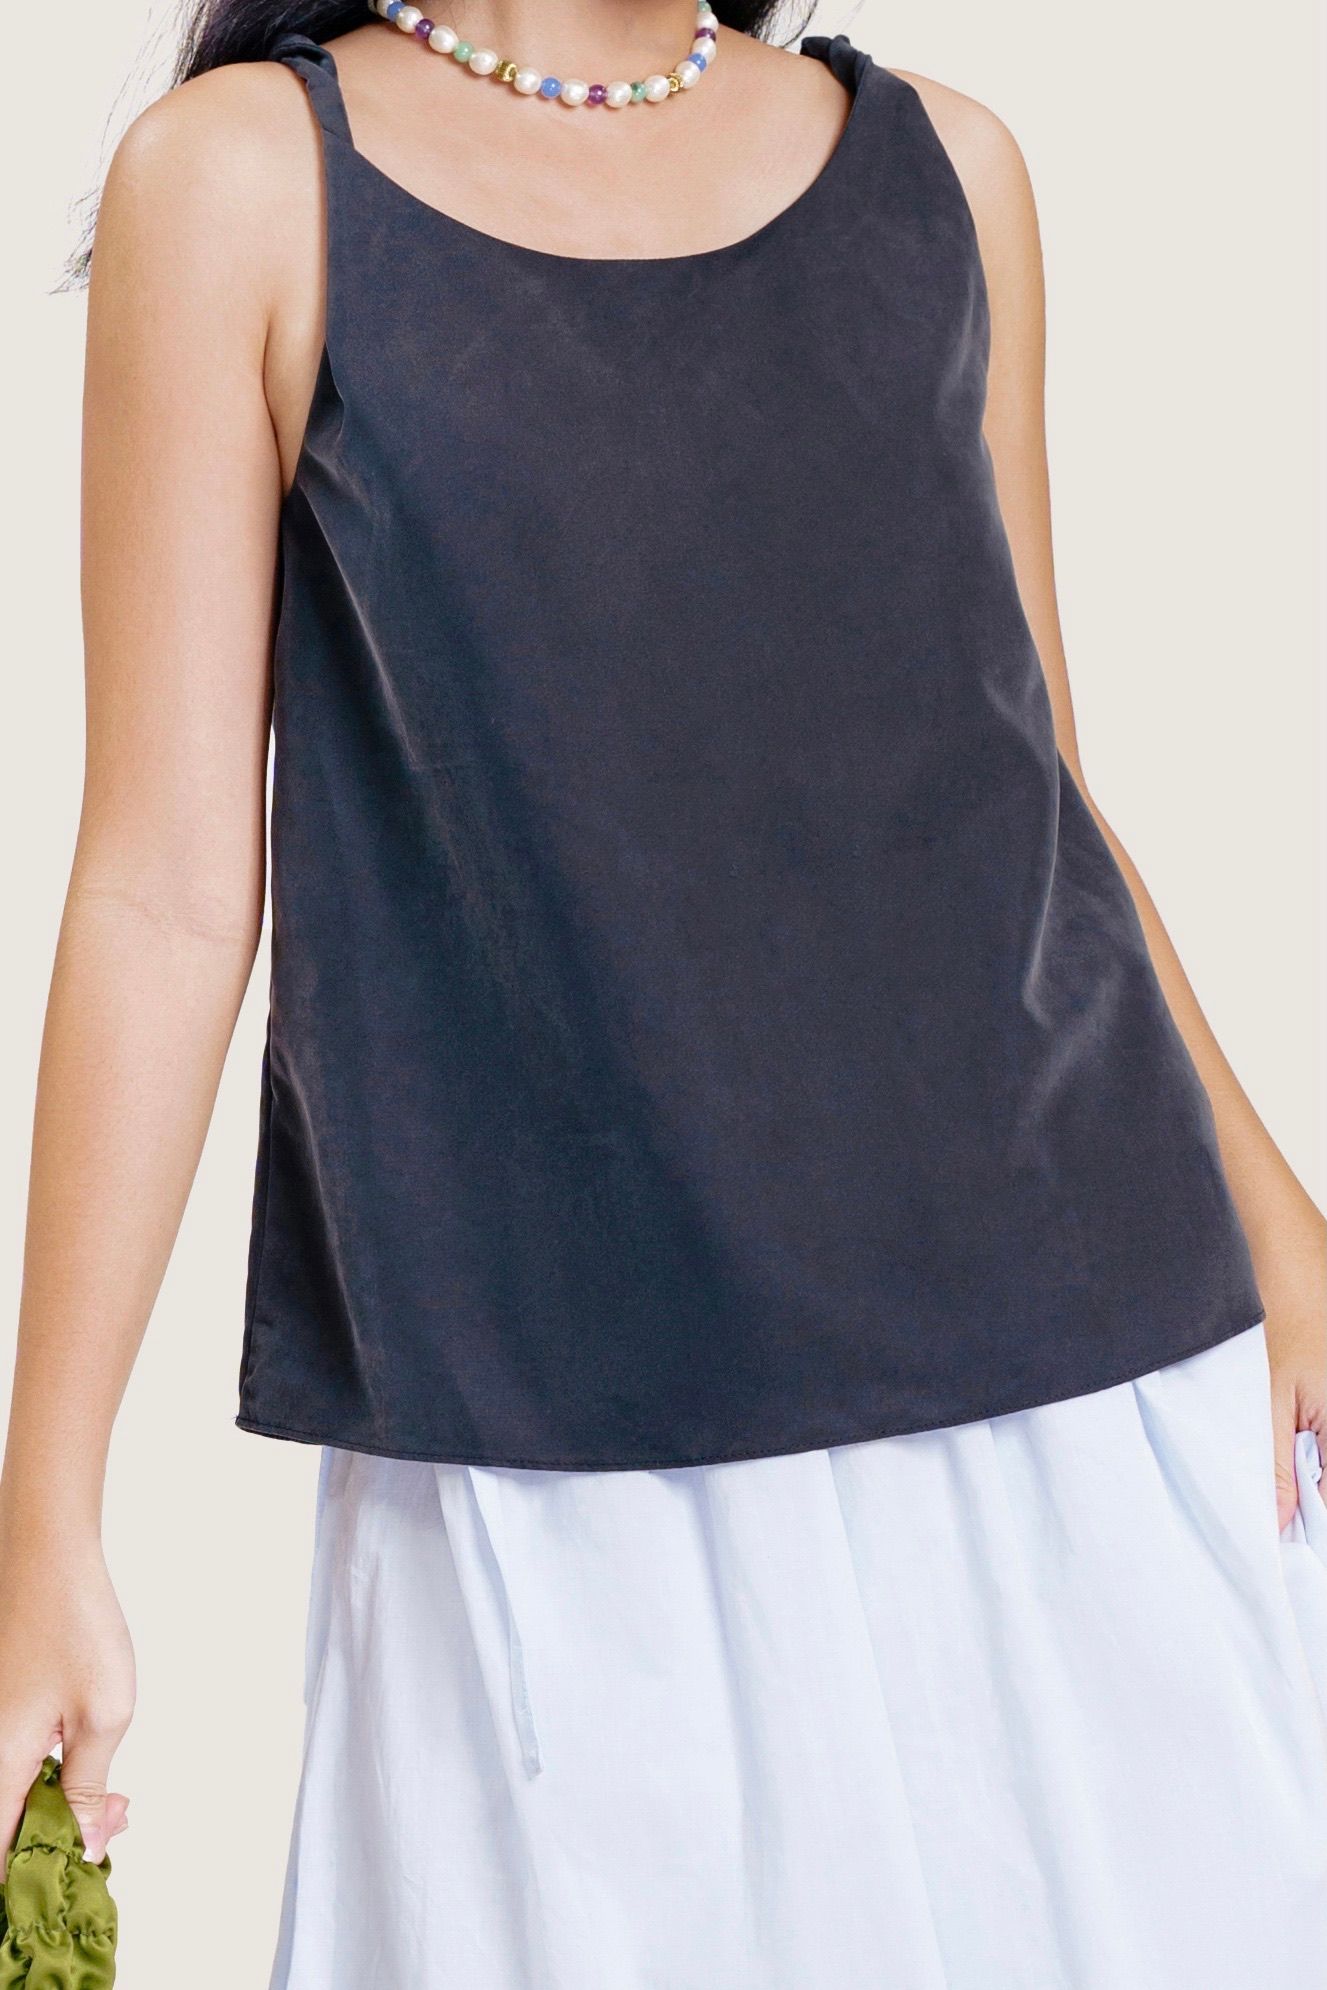  Black Silvery Twisted Straps Cami Top 